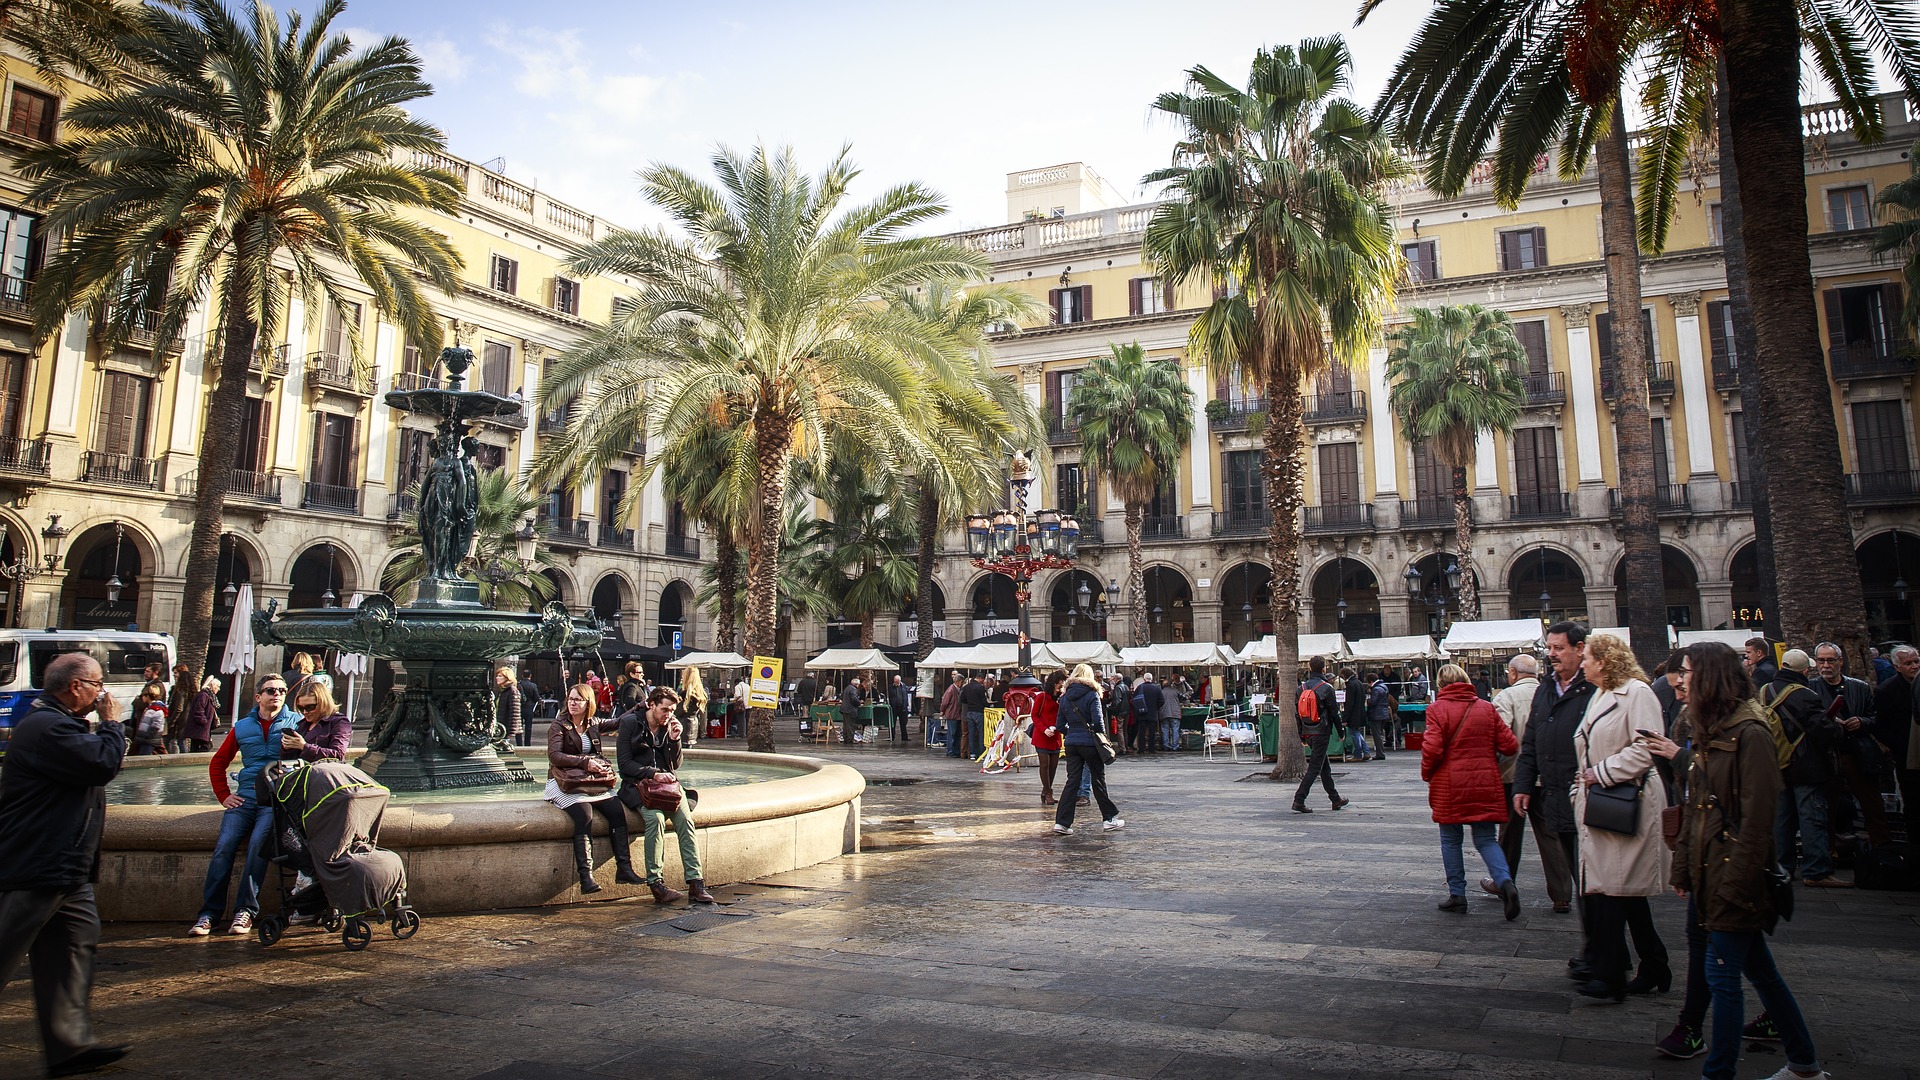 People in a square in Barcelona. Photo by skaramelka on Pixabay